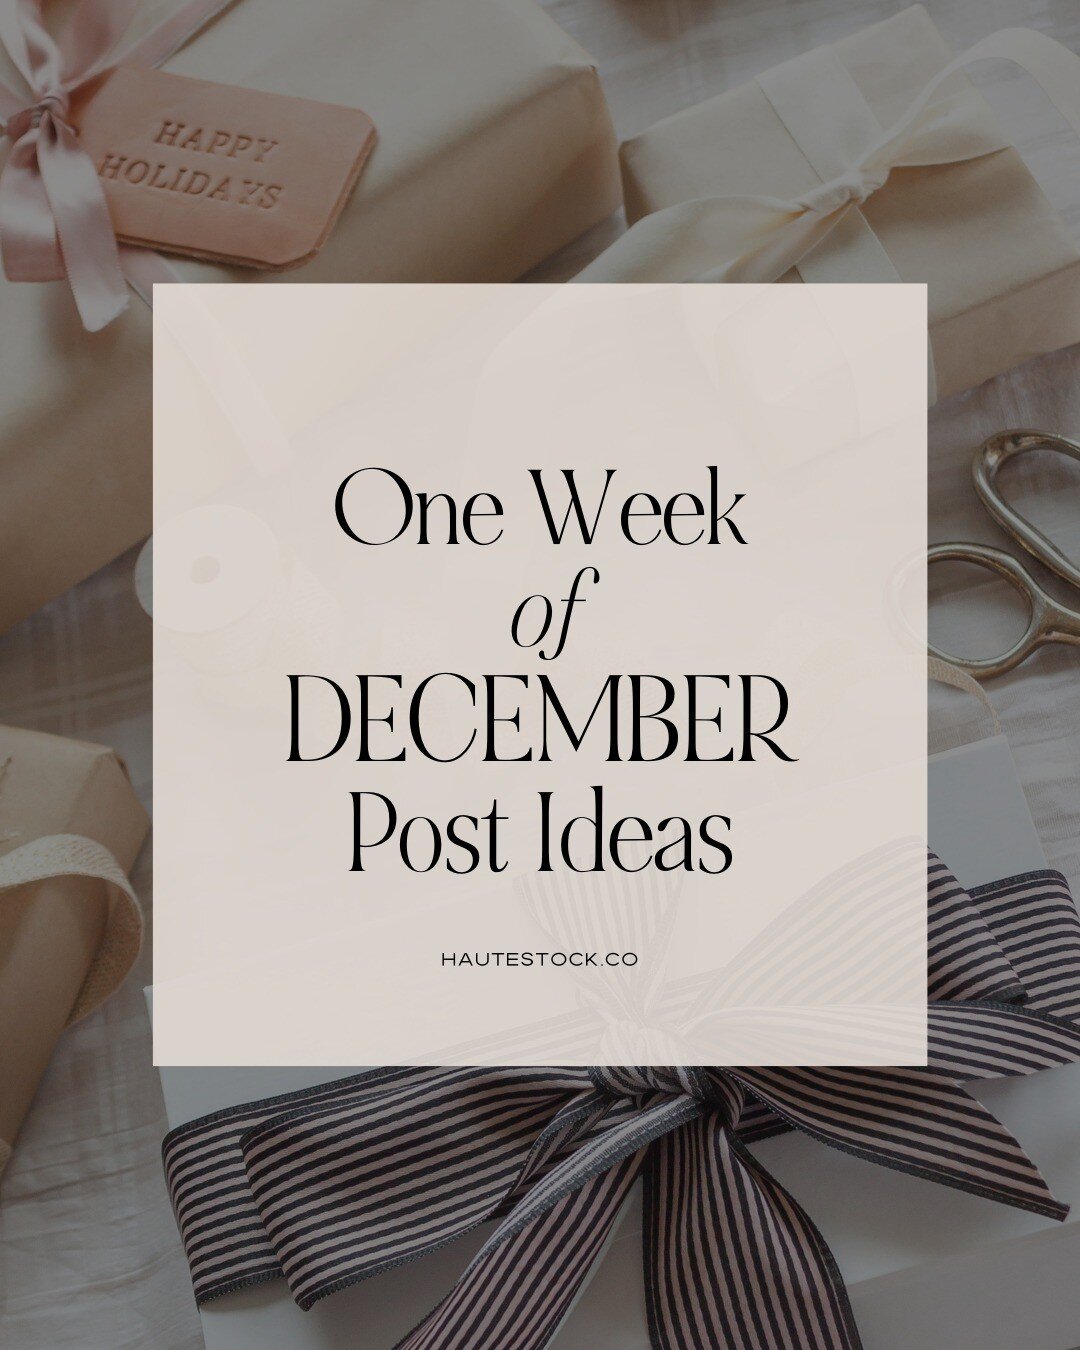 Need post ideas for December? Save this to help with content planning this week!

December is a natural time for reflection so you can create content around your learning lessons from the year that would help your audience in their own journey.

You'